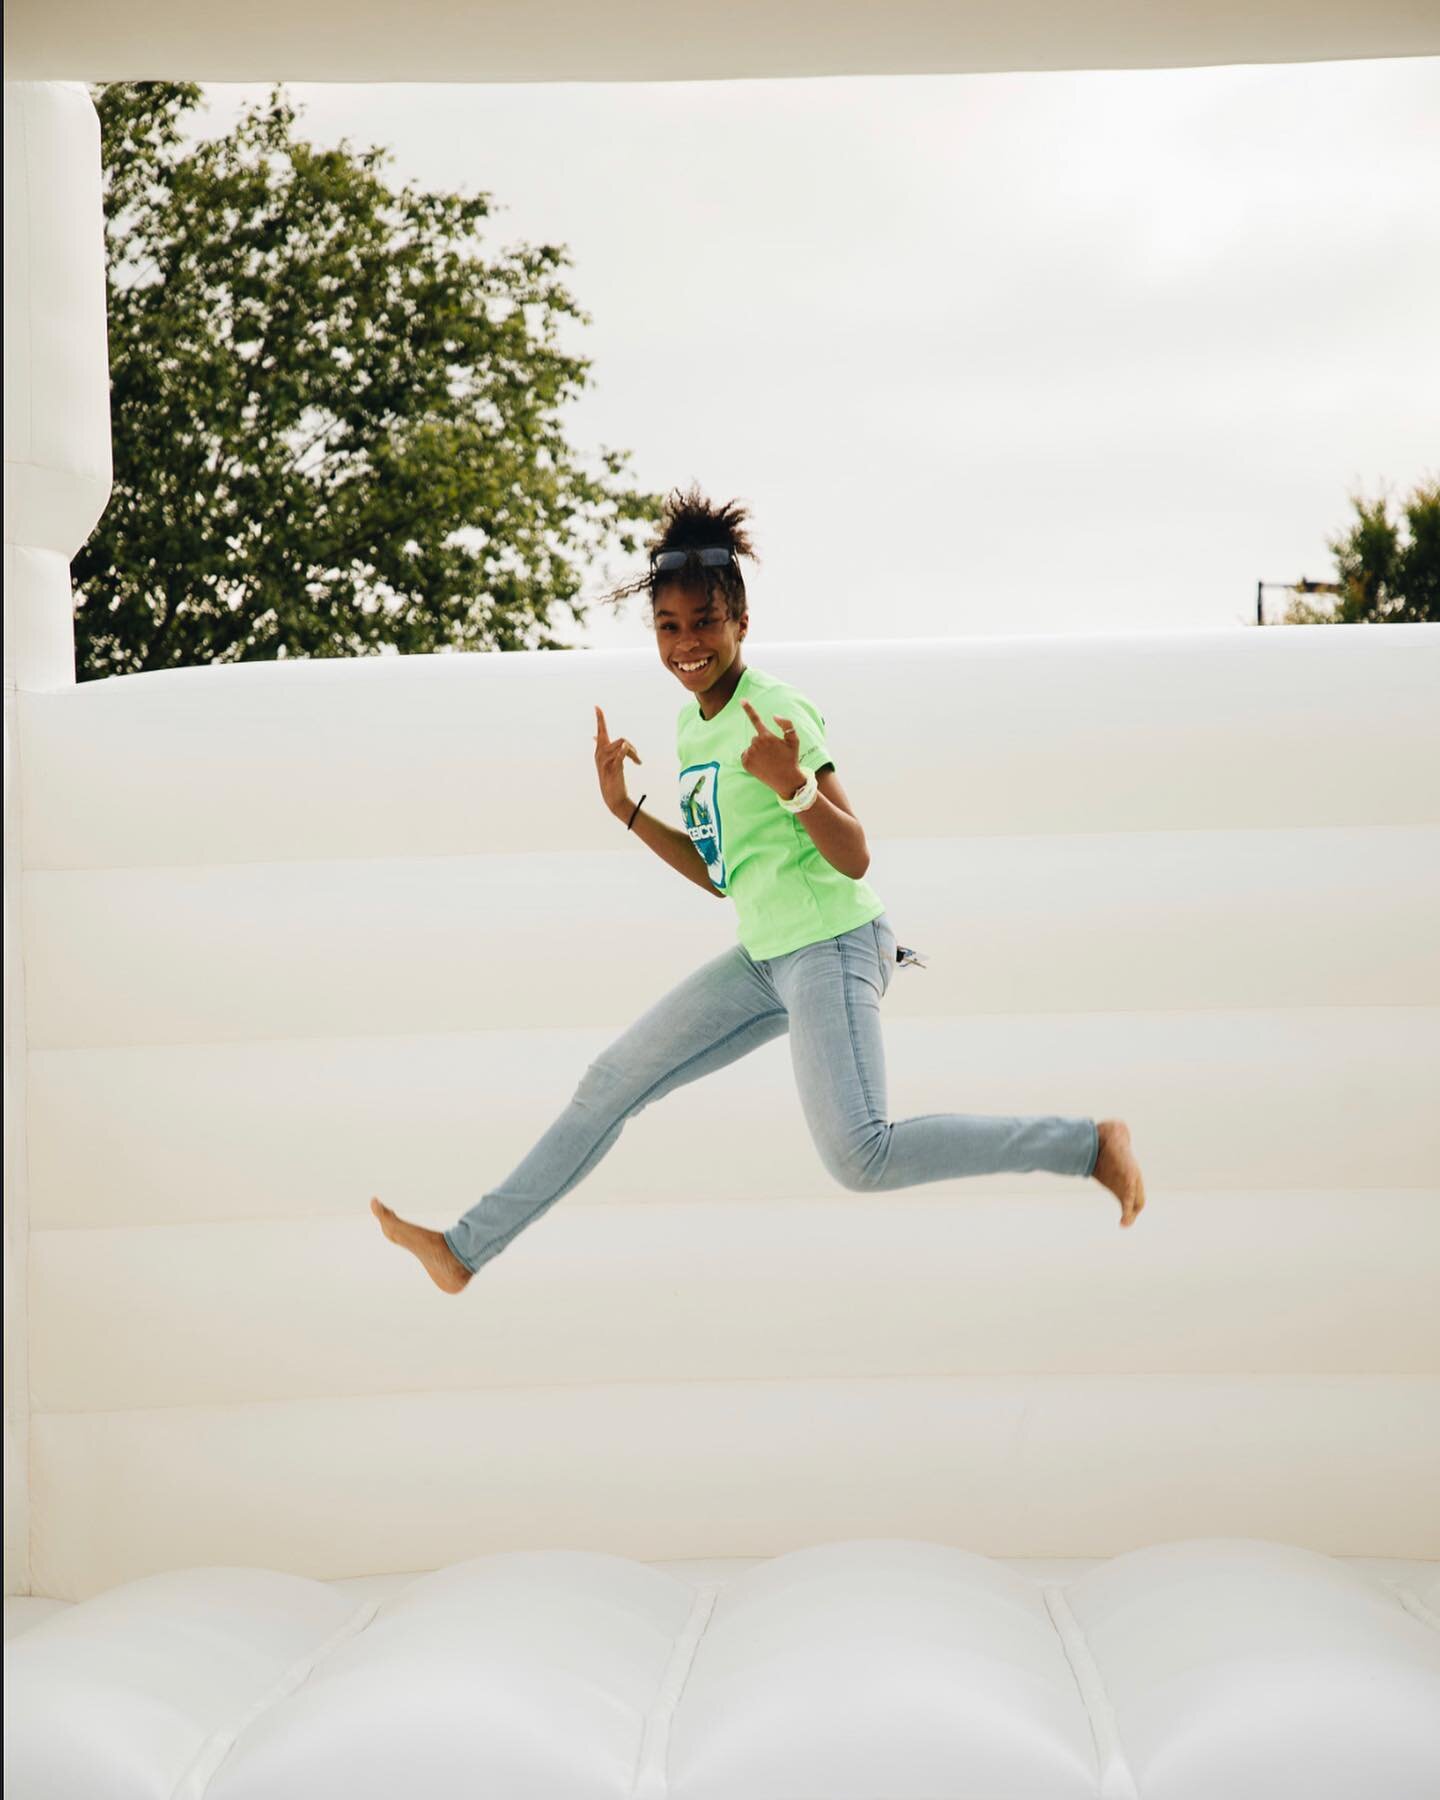 What&rsquo;s up, it&rsquo;s FriYAY! Have you booked your bounce house for your summer party yet?  Visit our website to inquire! 

www.classicbounceofcharlotte.com